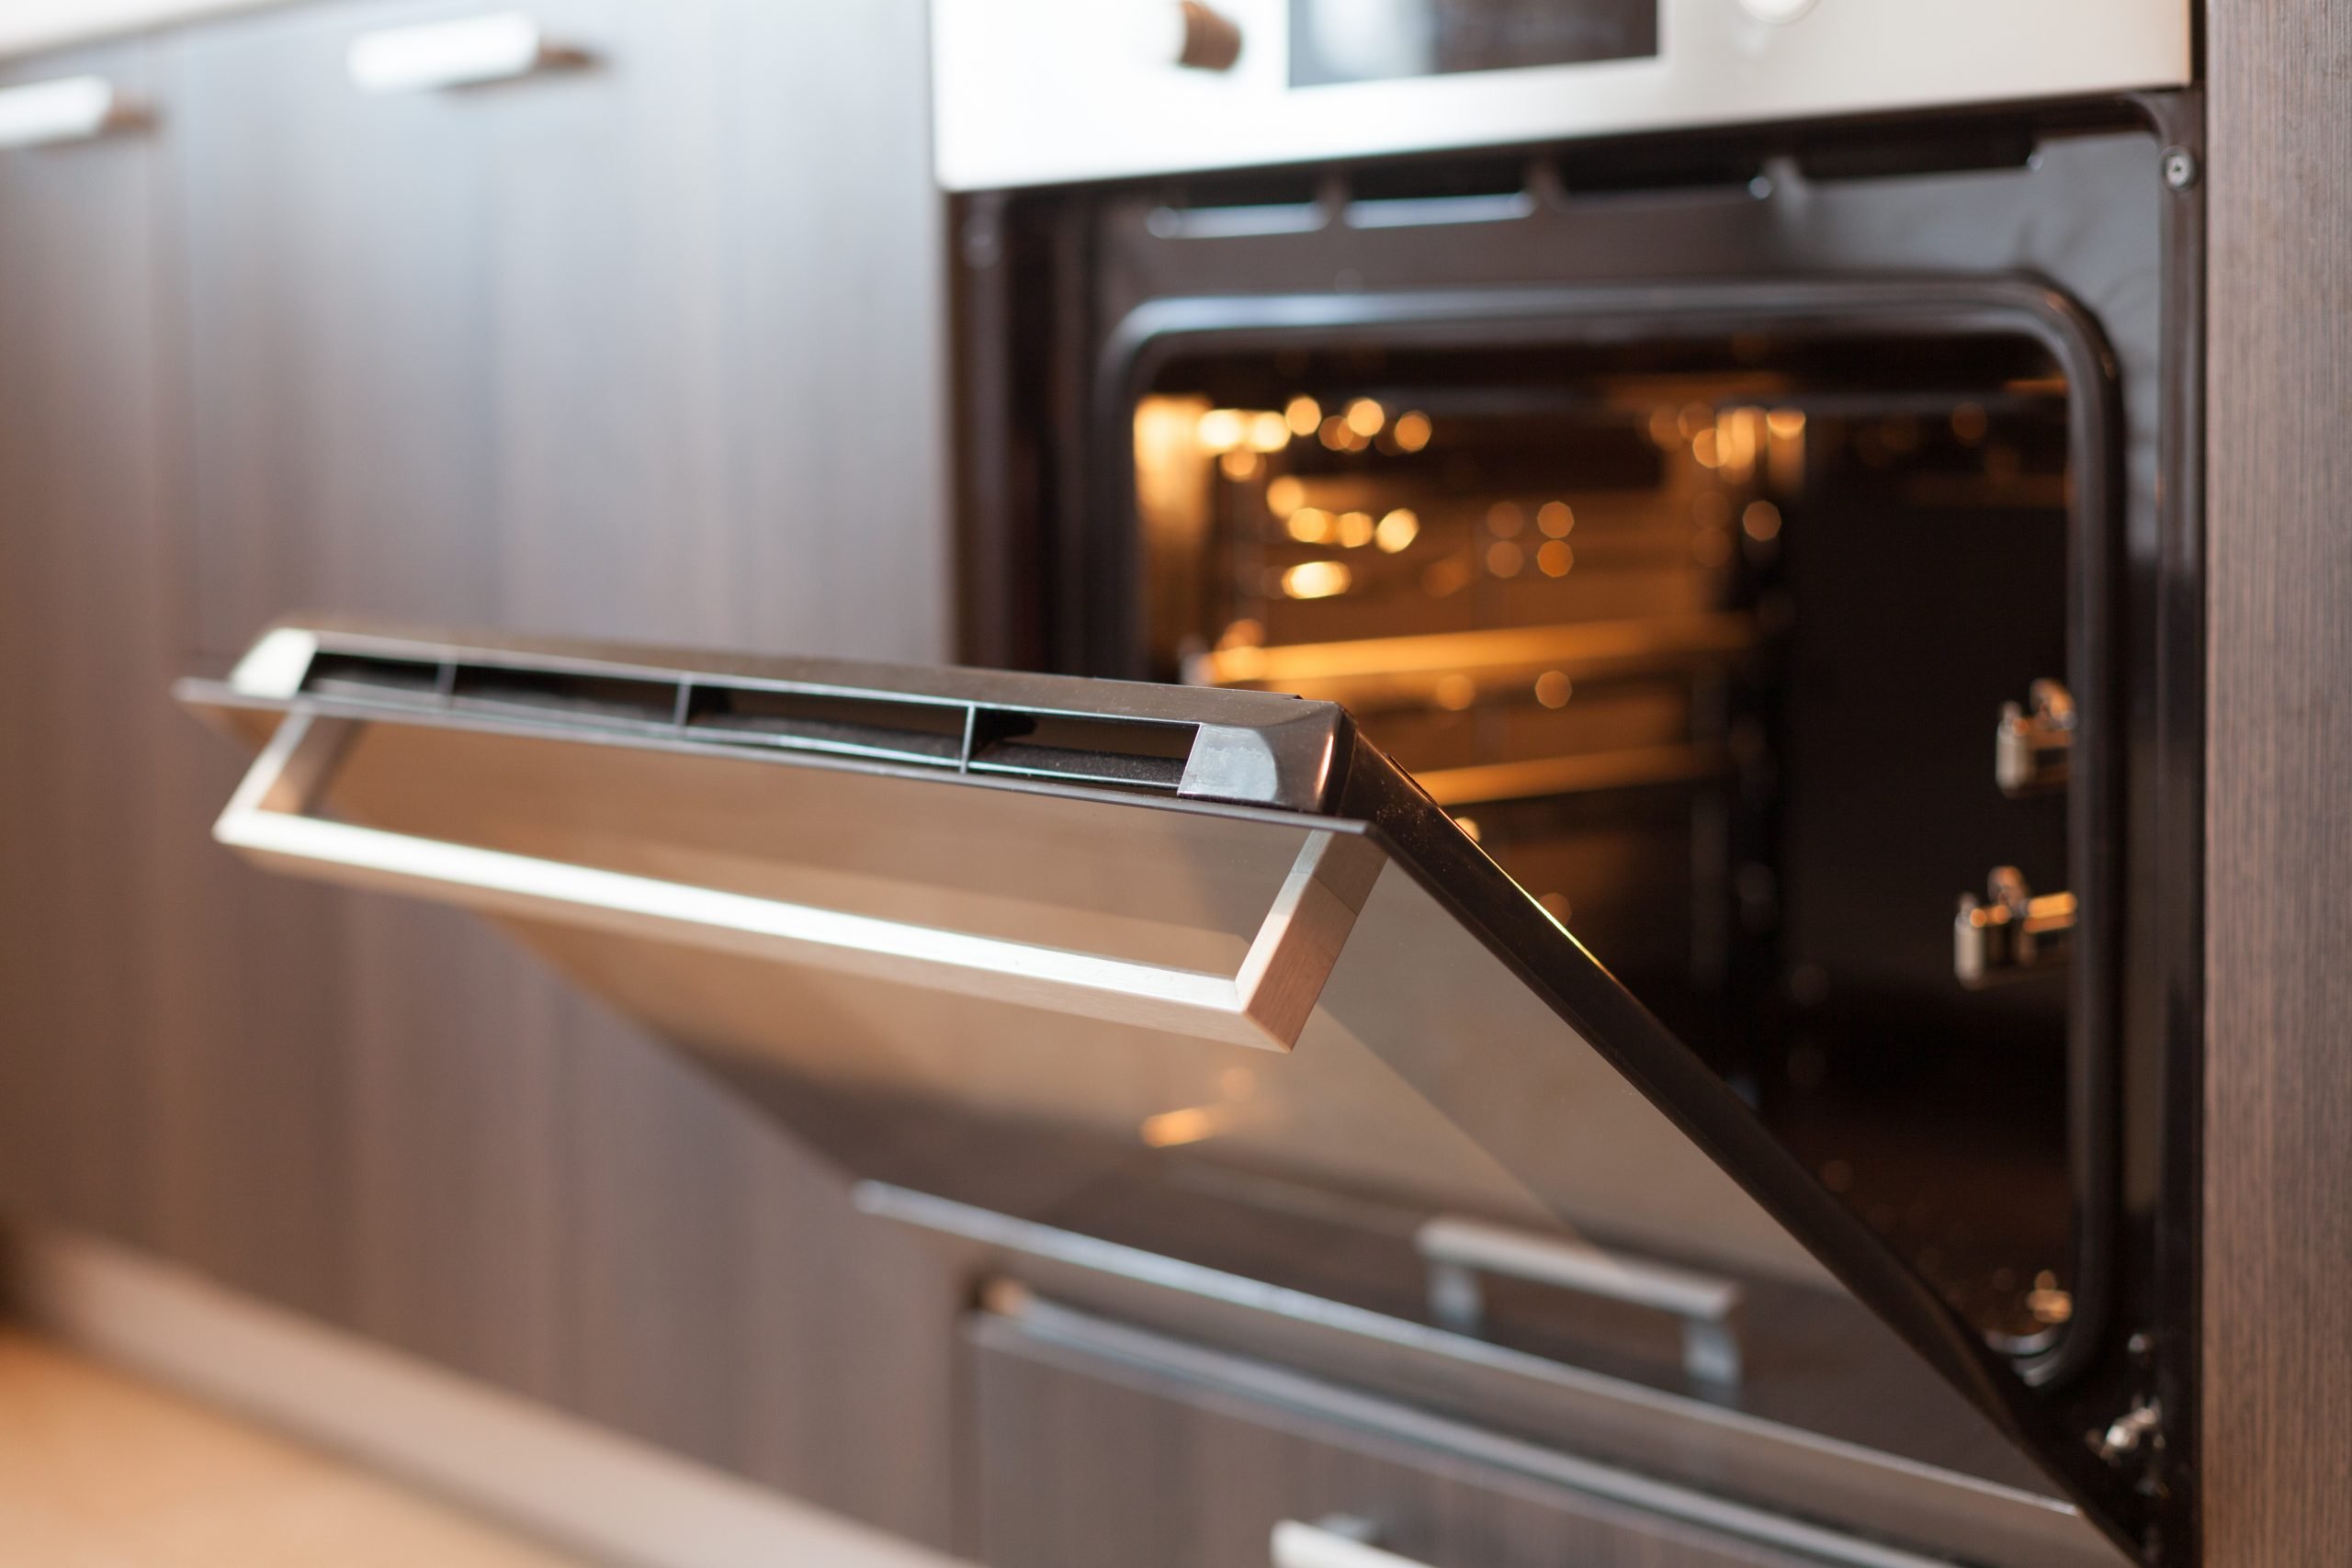 How to prepare for self-cleaning your oven - Appliance Repair Near Me